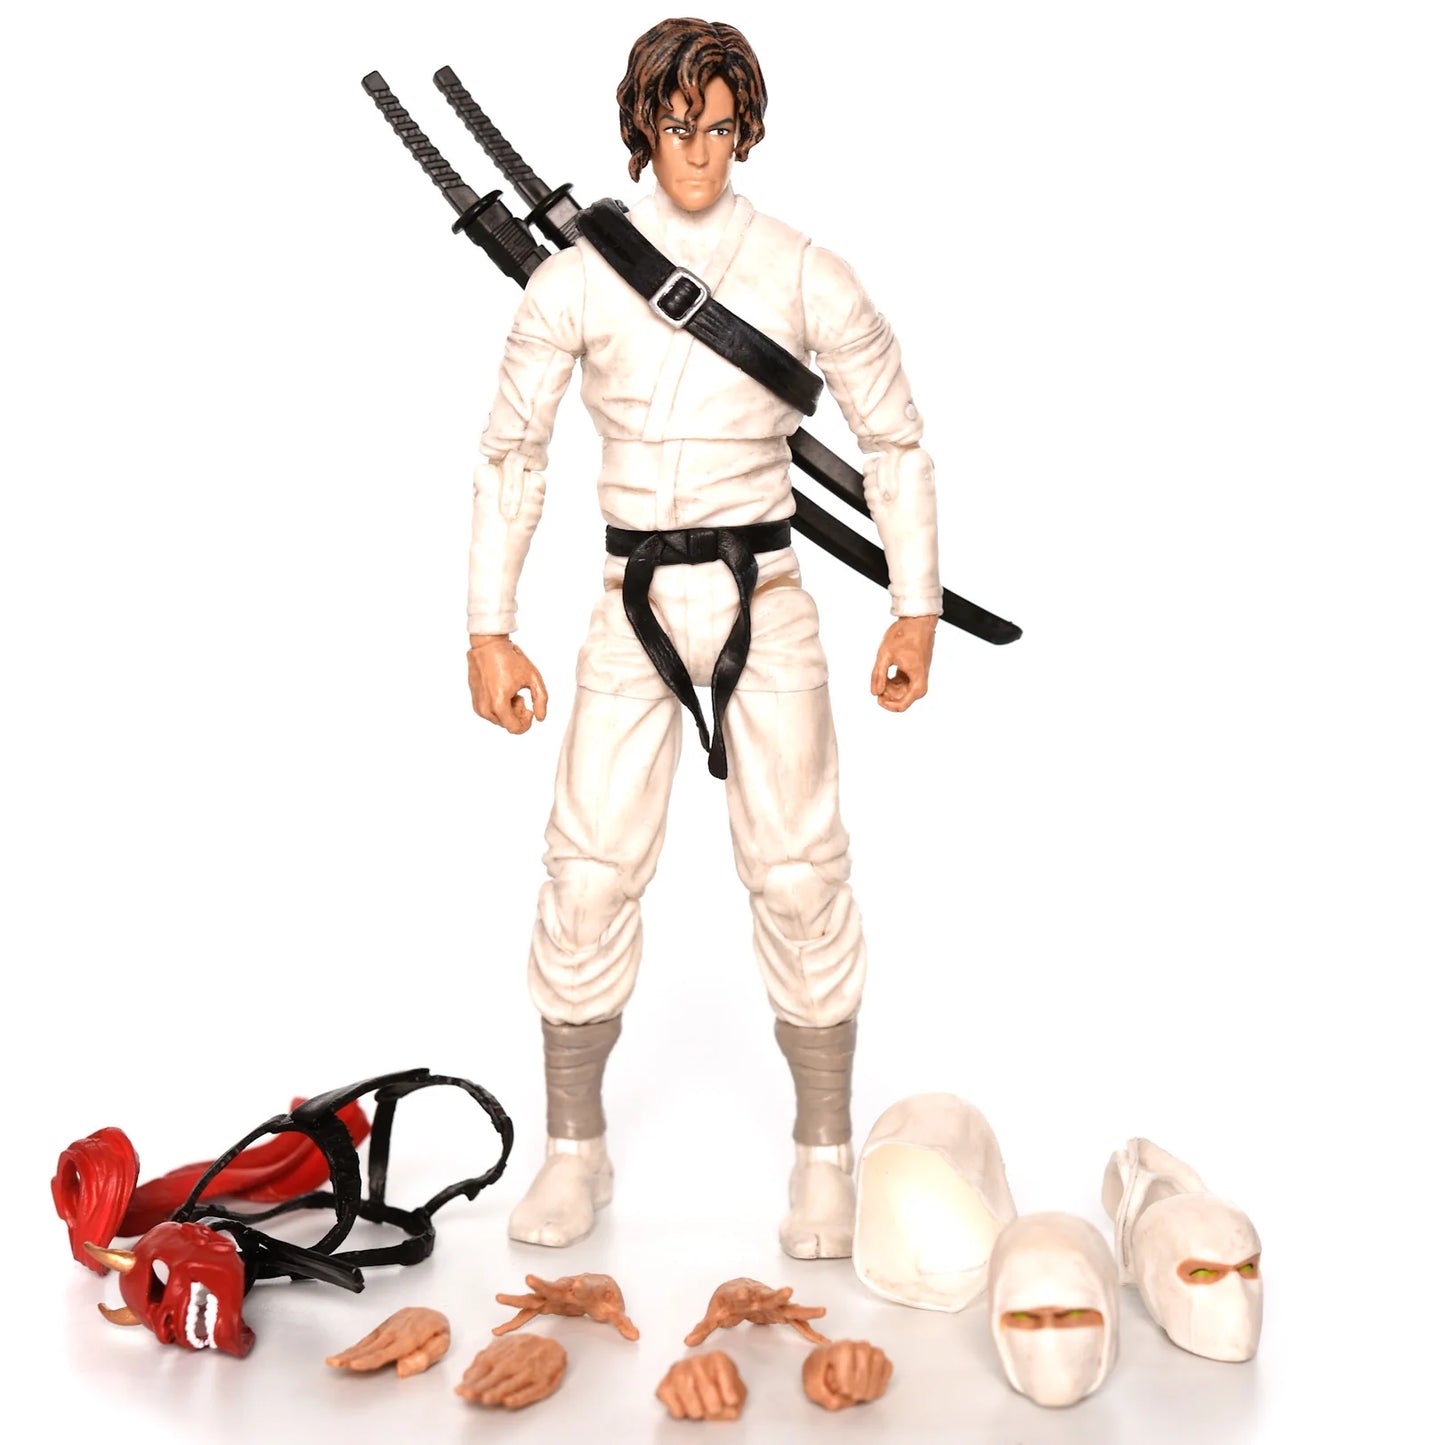 Articulated Icons The Feudal Series Shoken (Heroic Martial Artist)